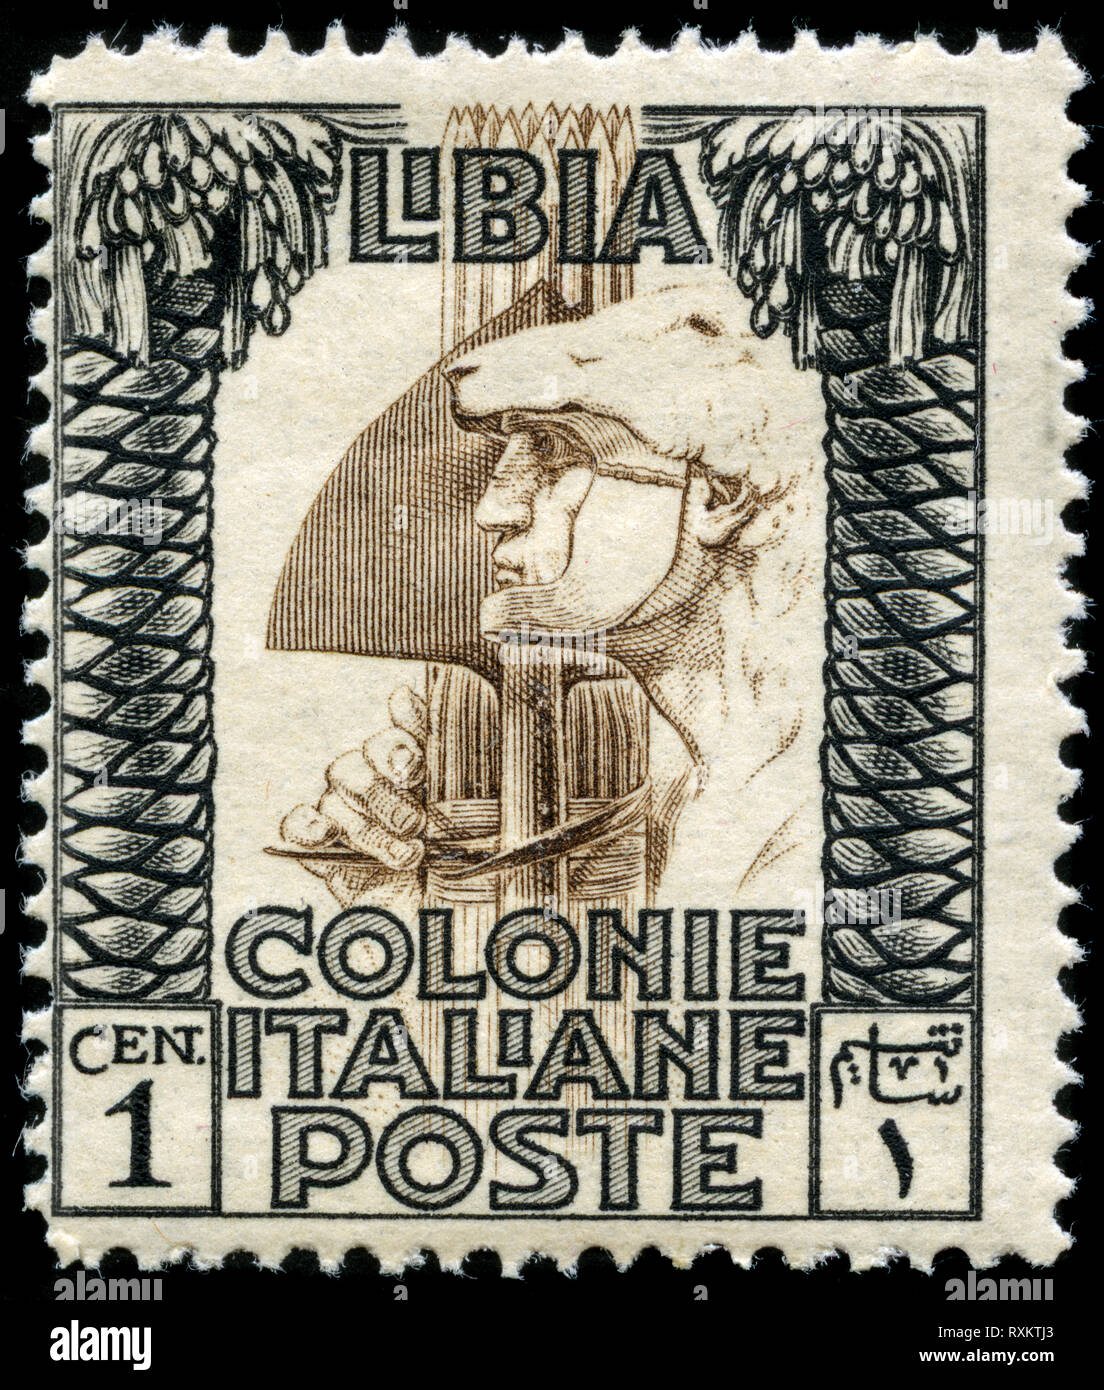 Postage stamp from Italian Libya in the Colonies - Libya series issued in 1924 Stock Photo